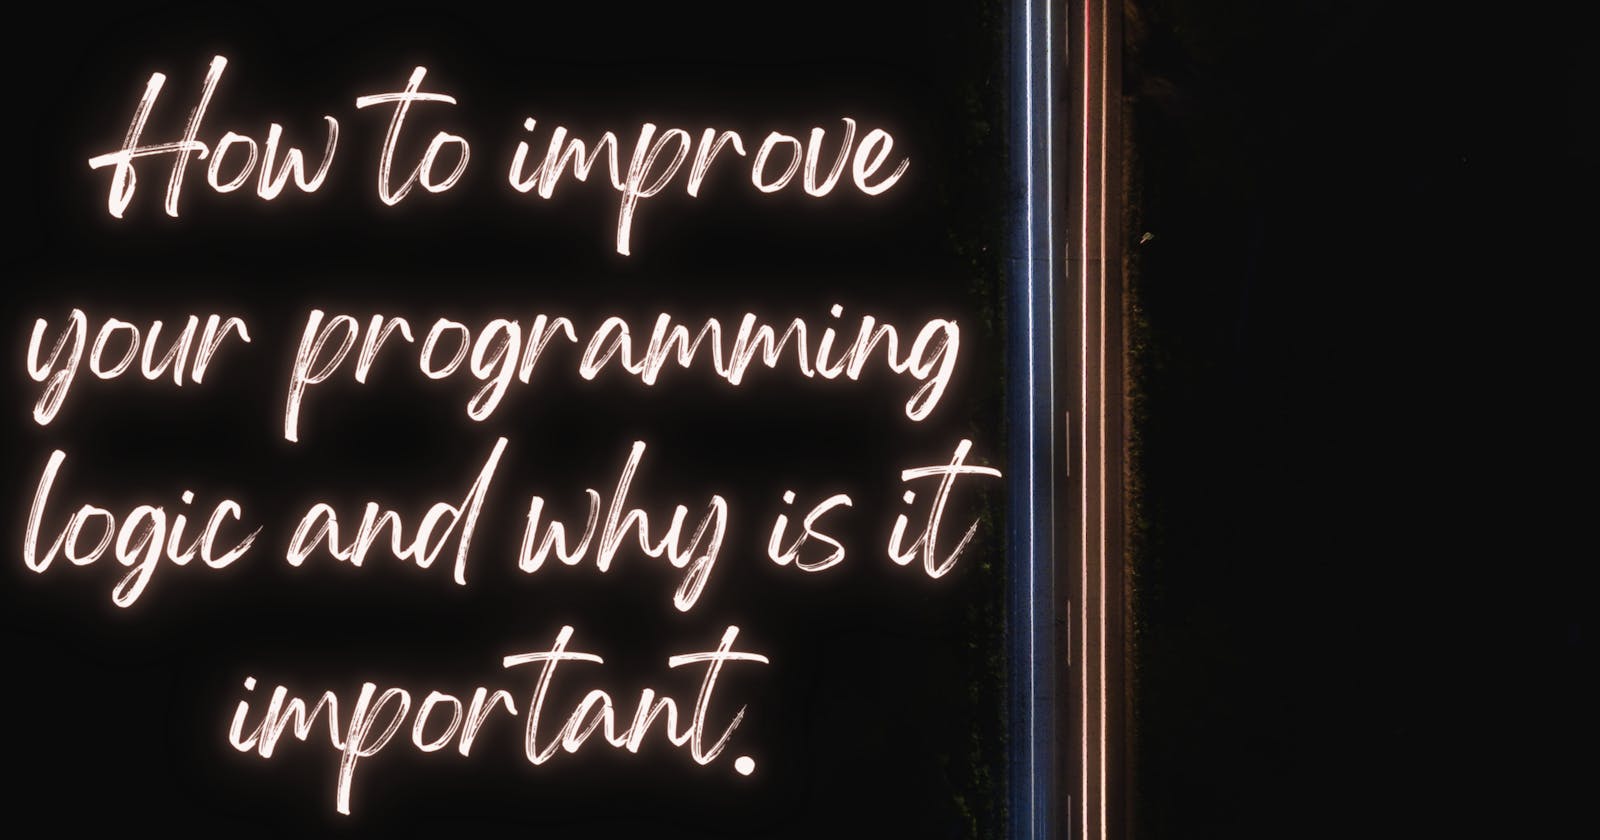 How to improve your programming logic and why is it Important.